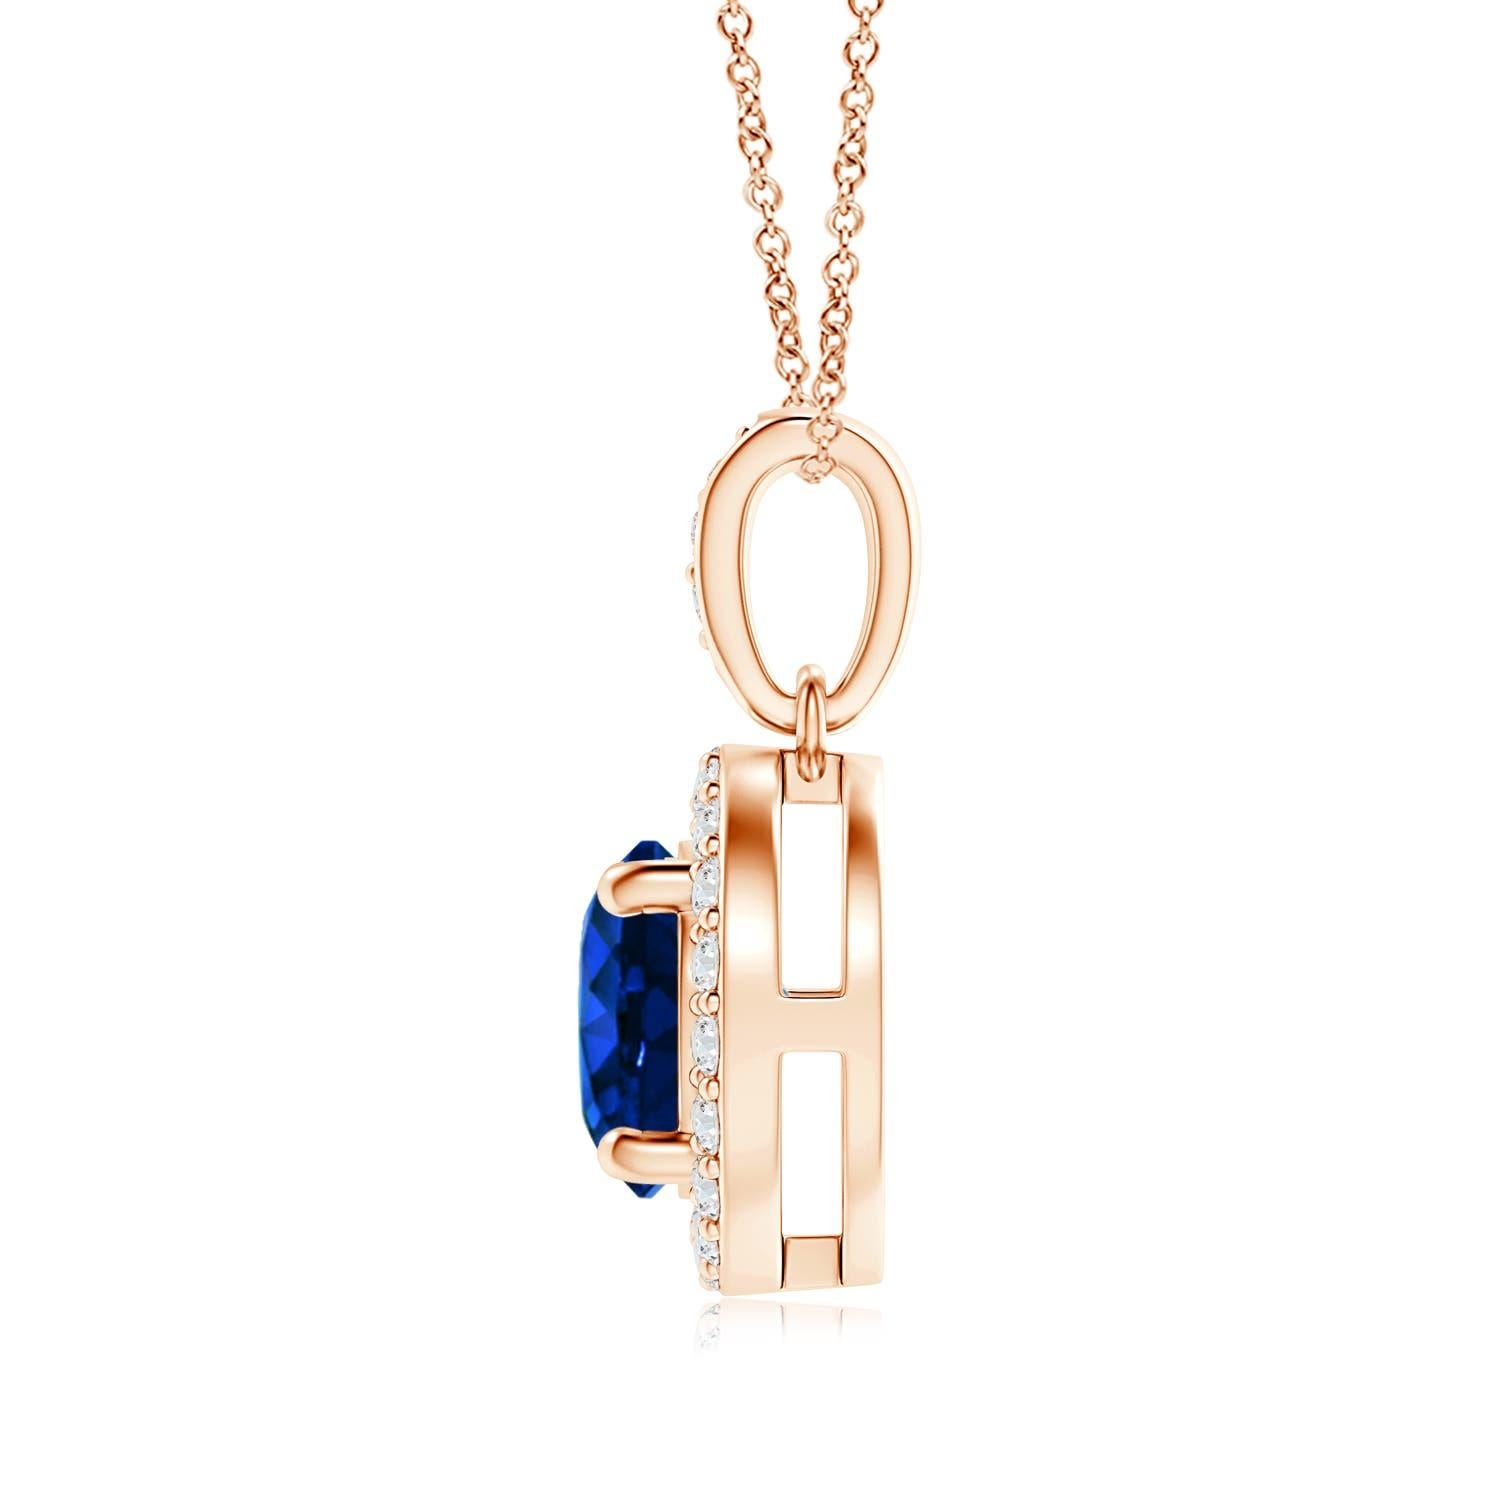 The GIA certified round blue sapphire is held in a prong setting and appears to be floating amid a dazzling diamond halo. There are additional diamond accents on the bale that elevate the elegant look of this 14K Rose Gold pendant.
